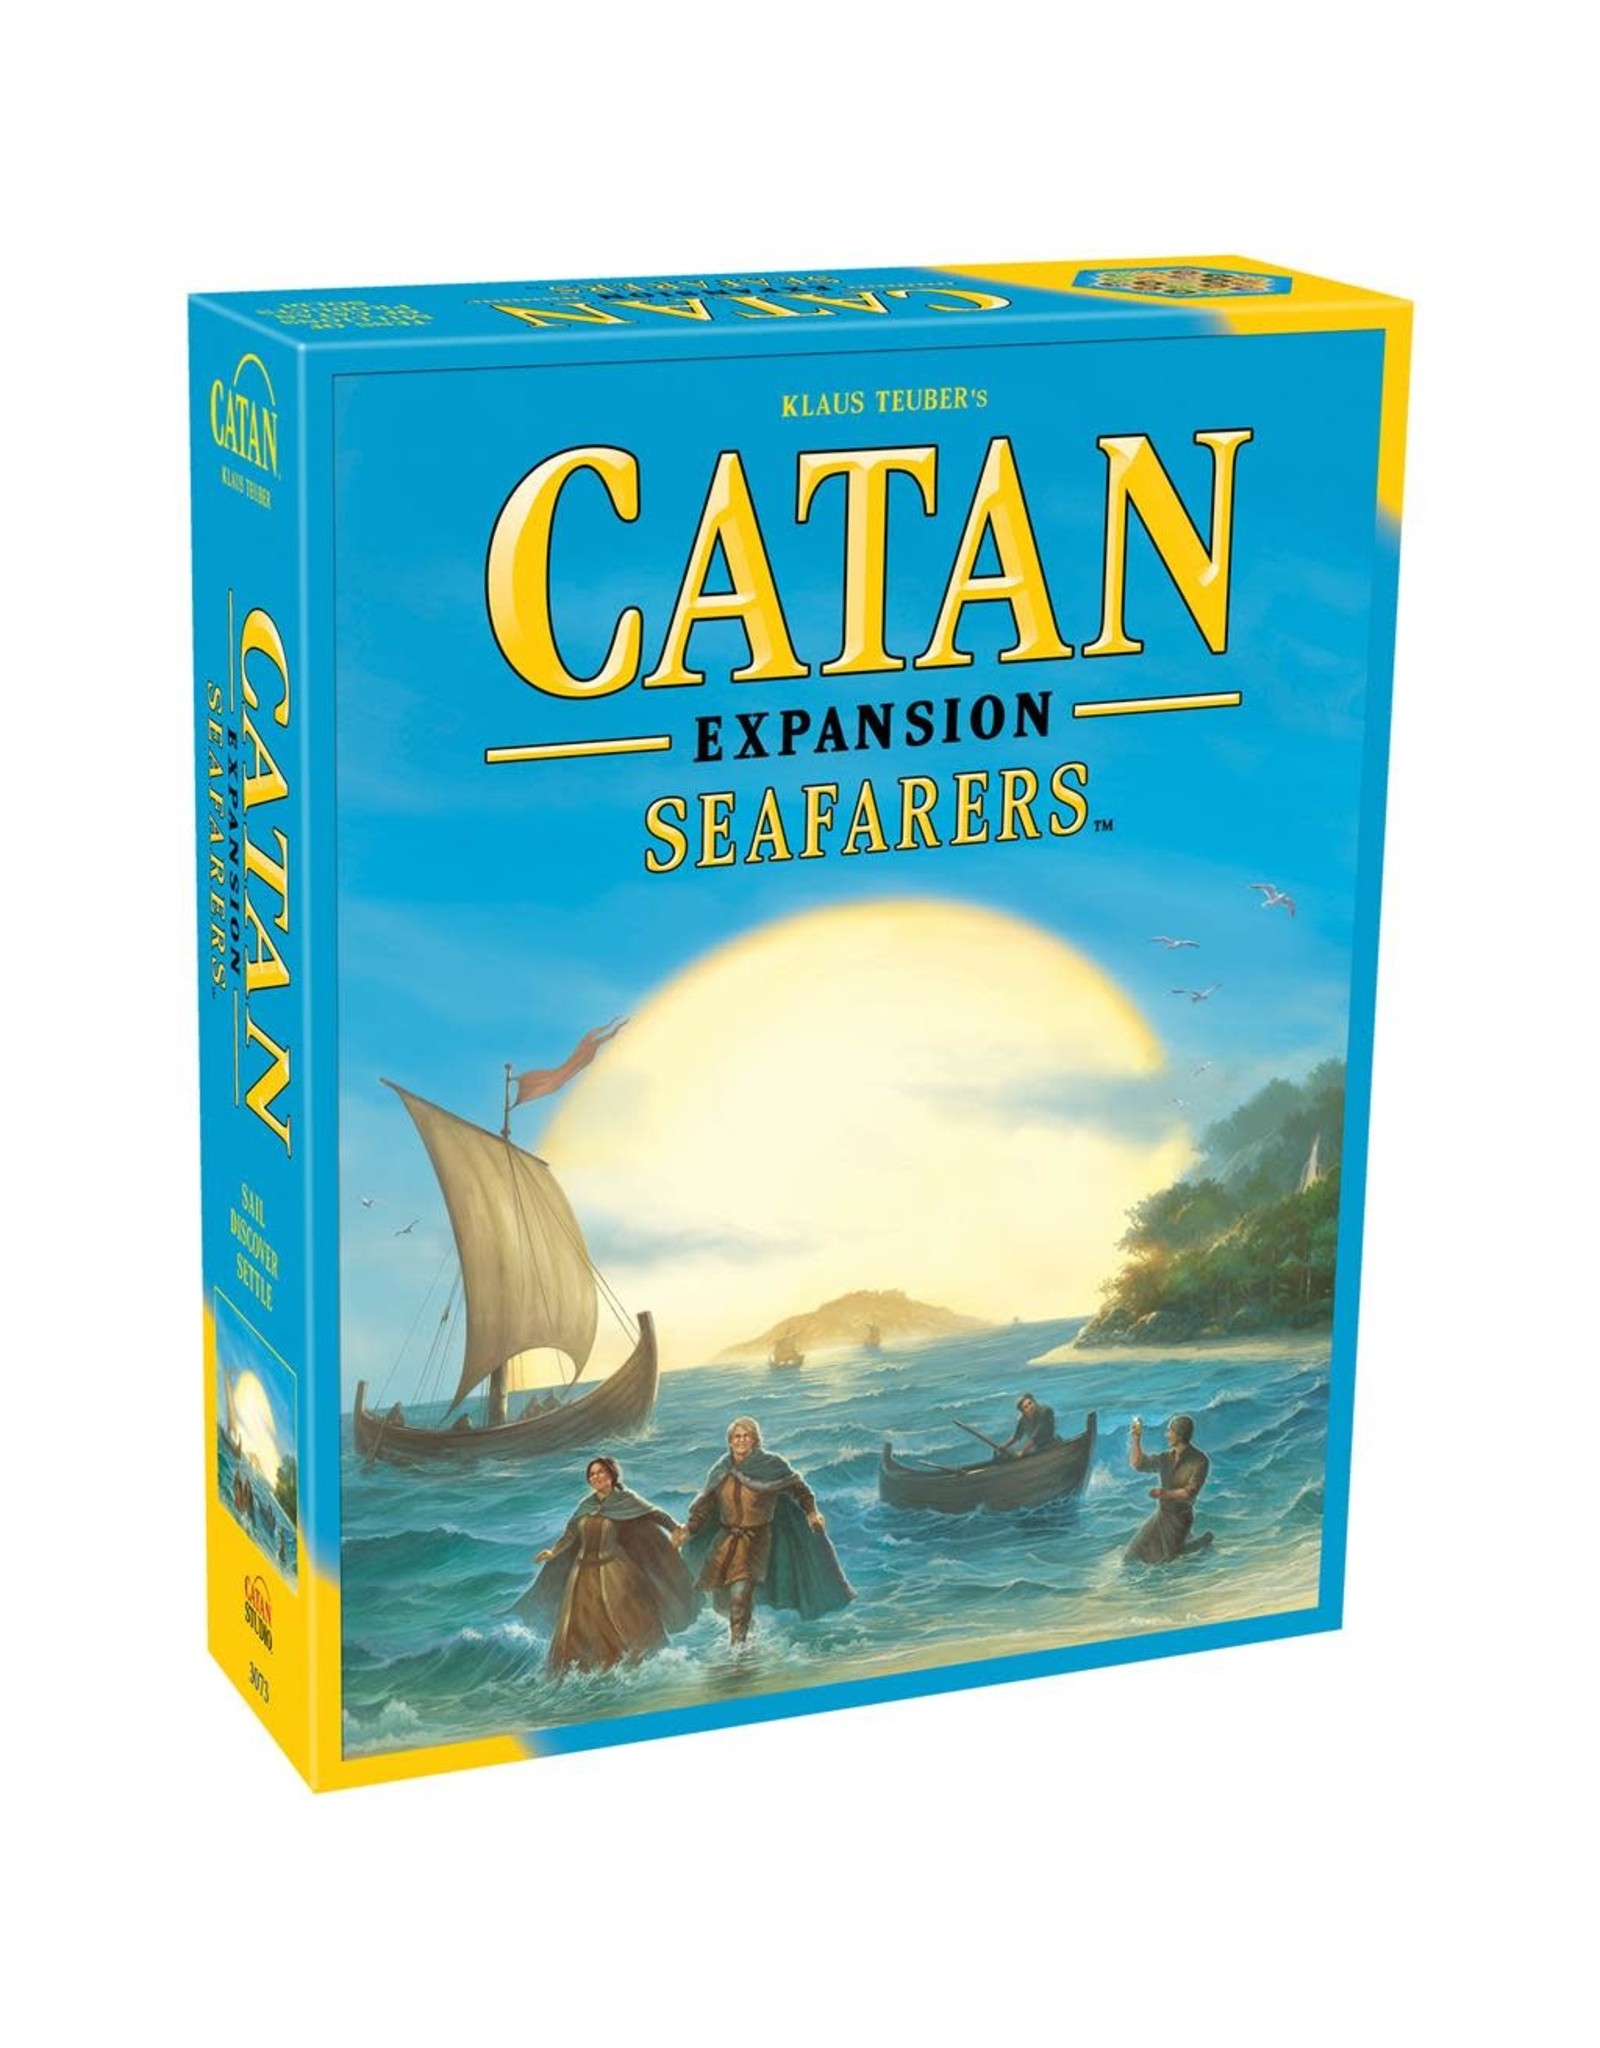 CLEARANCE Catan Expansion Seafarers